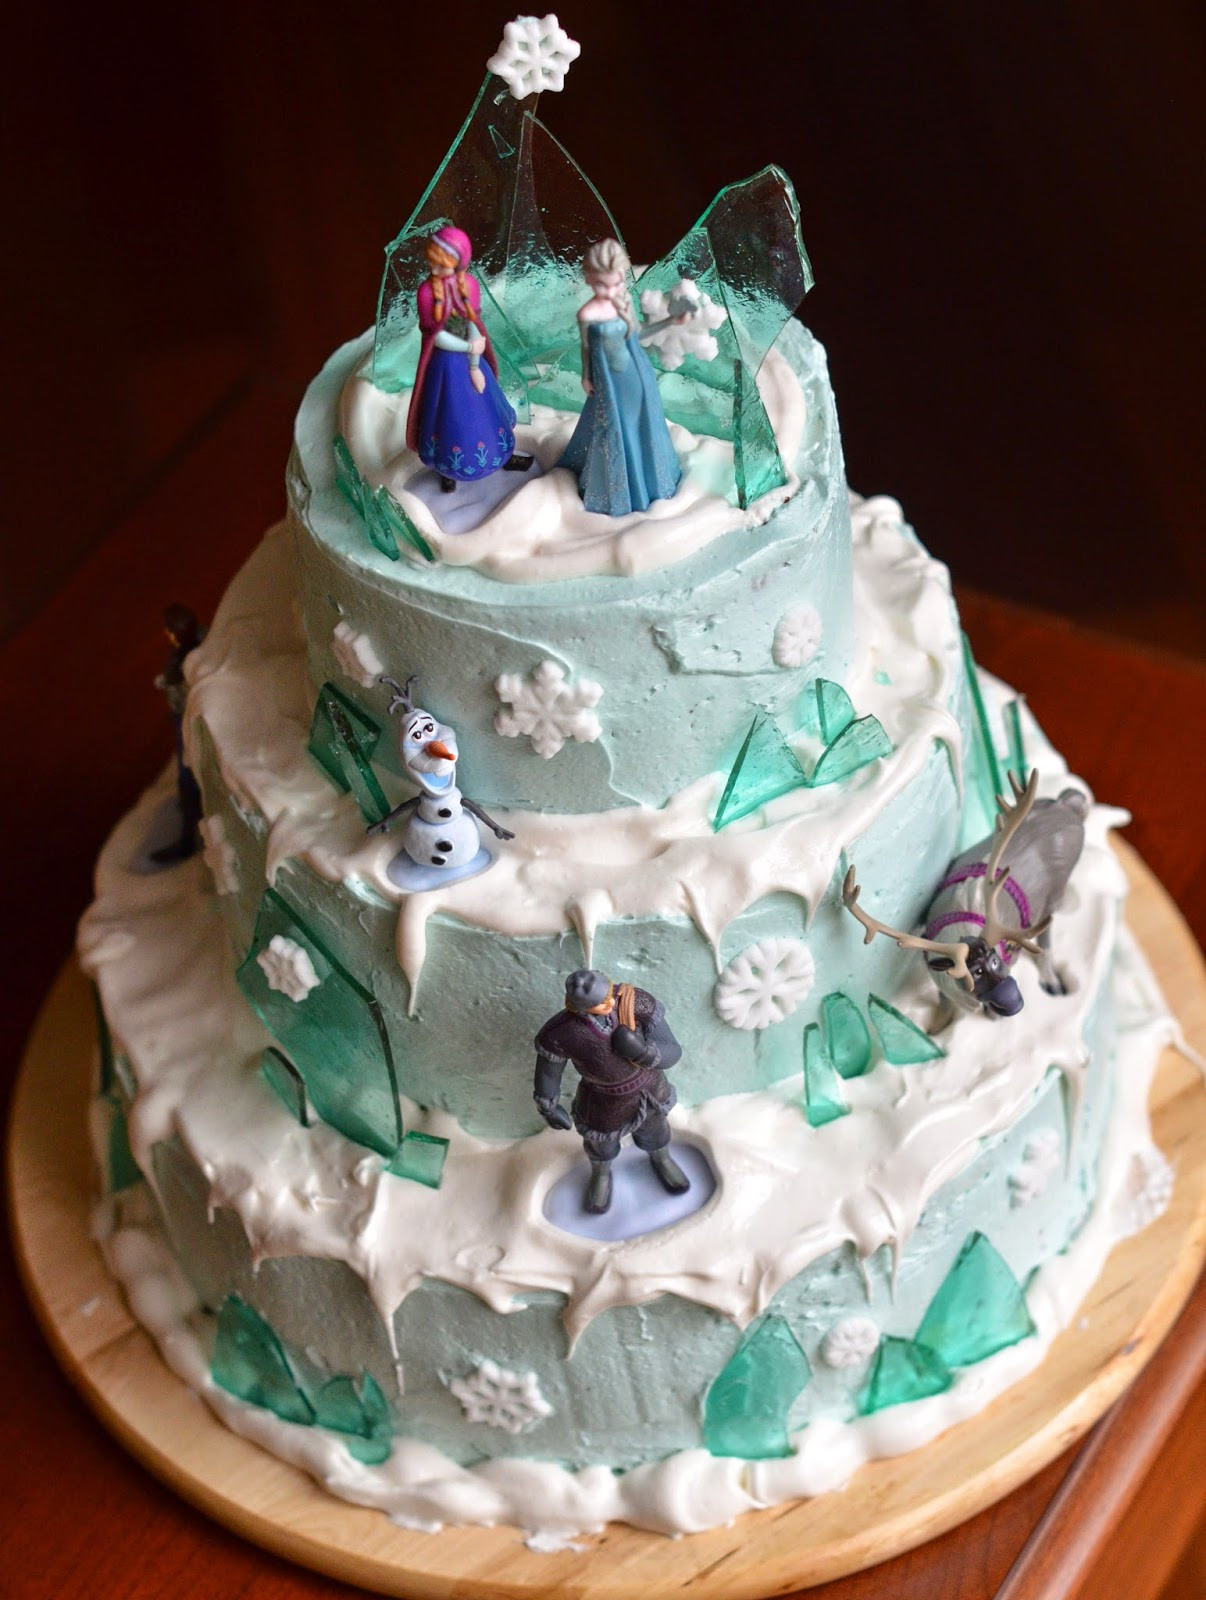 Frozen Birthday Cakes
 Sugar and Spice and Everything Nice A Frozen birthday cake